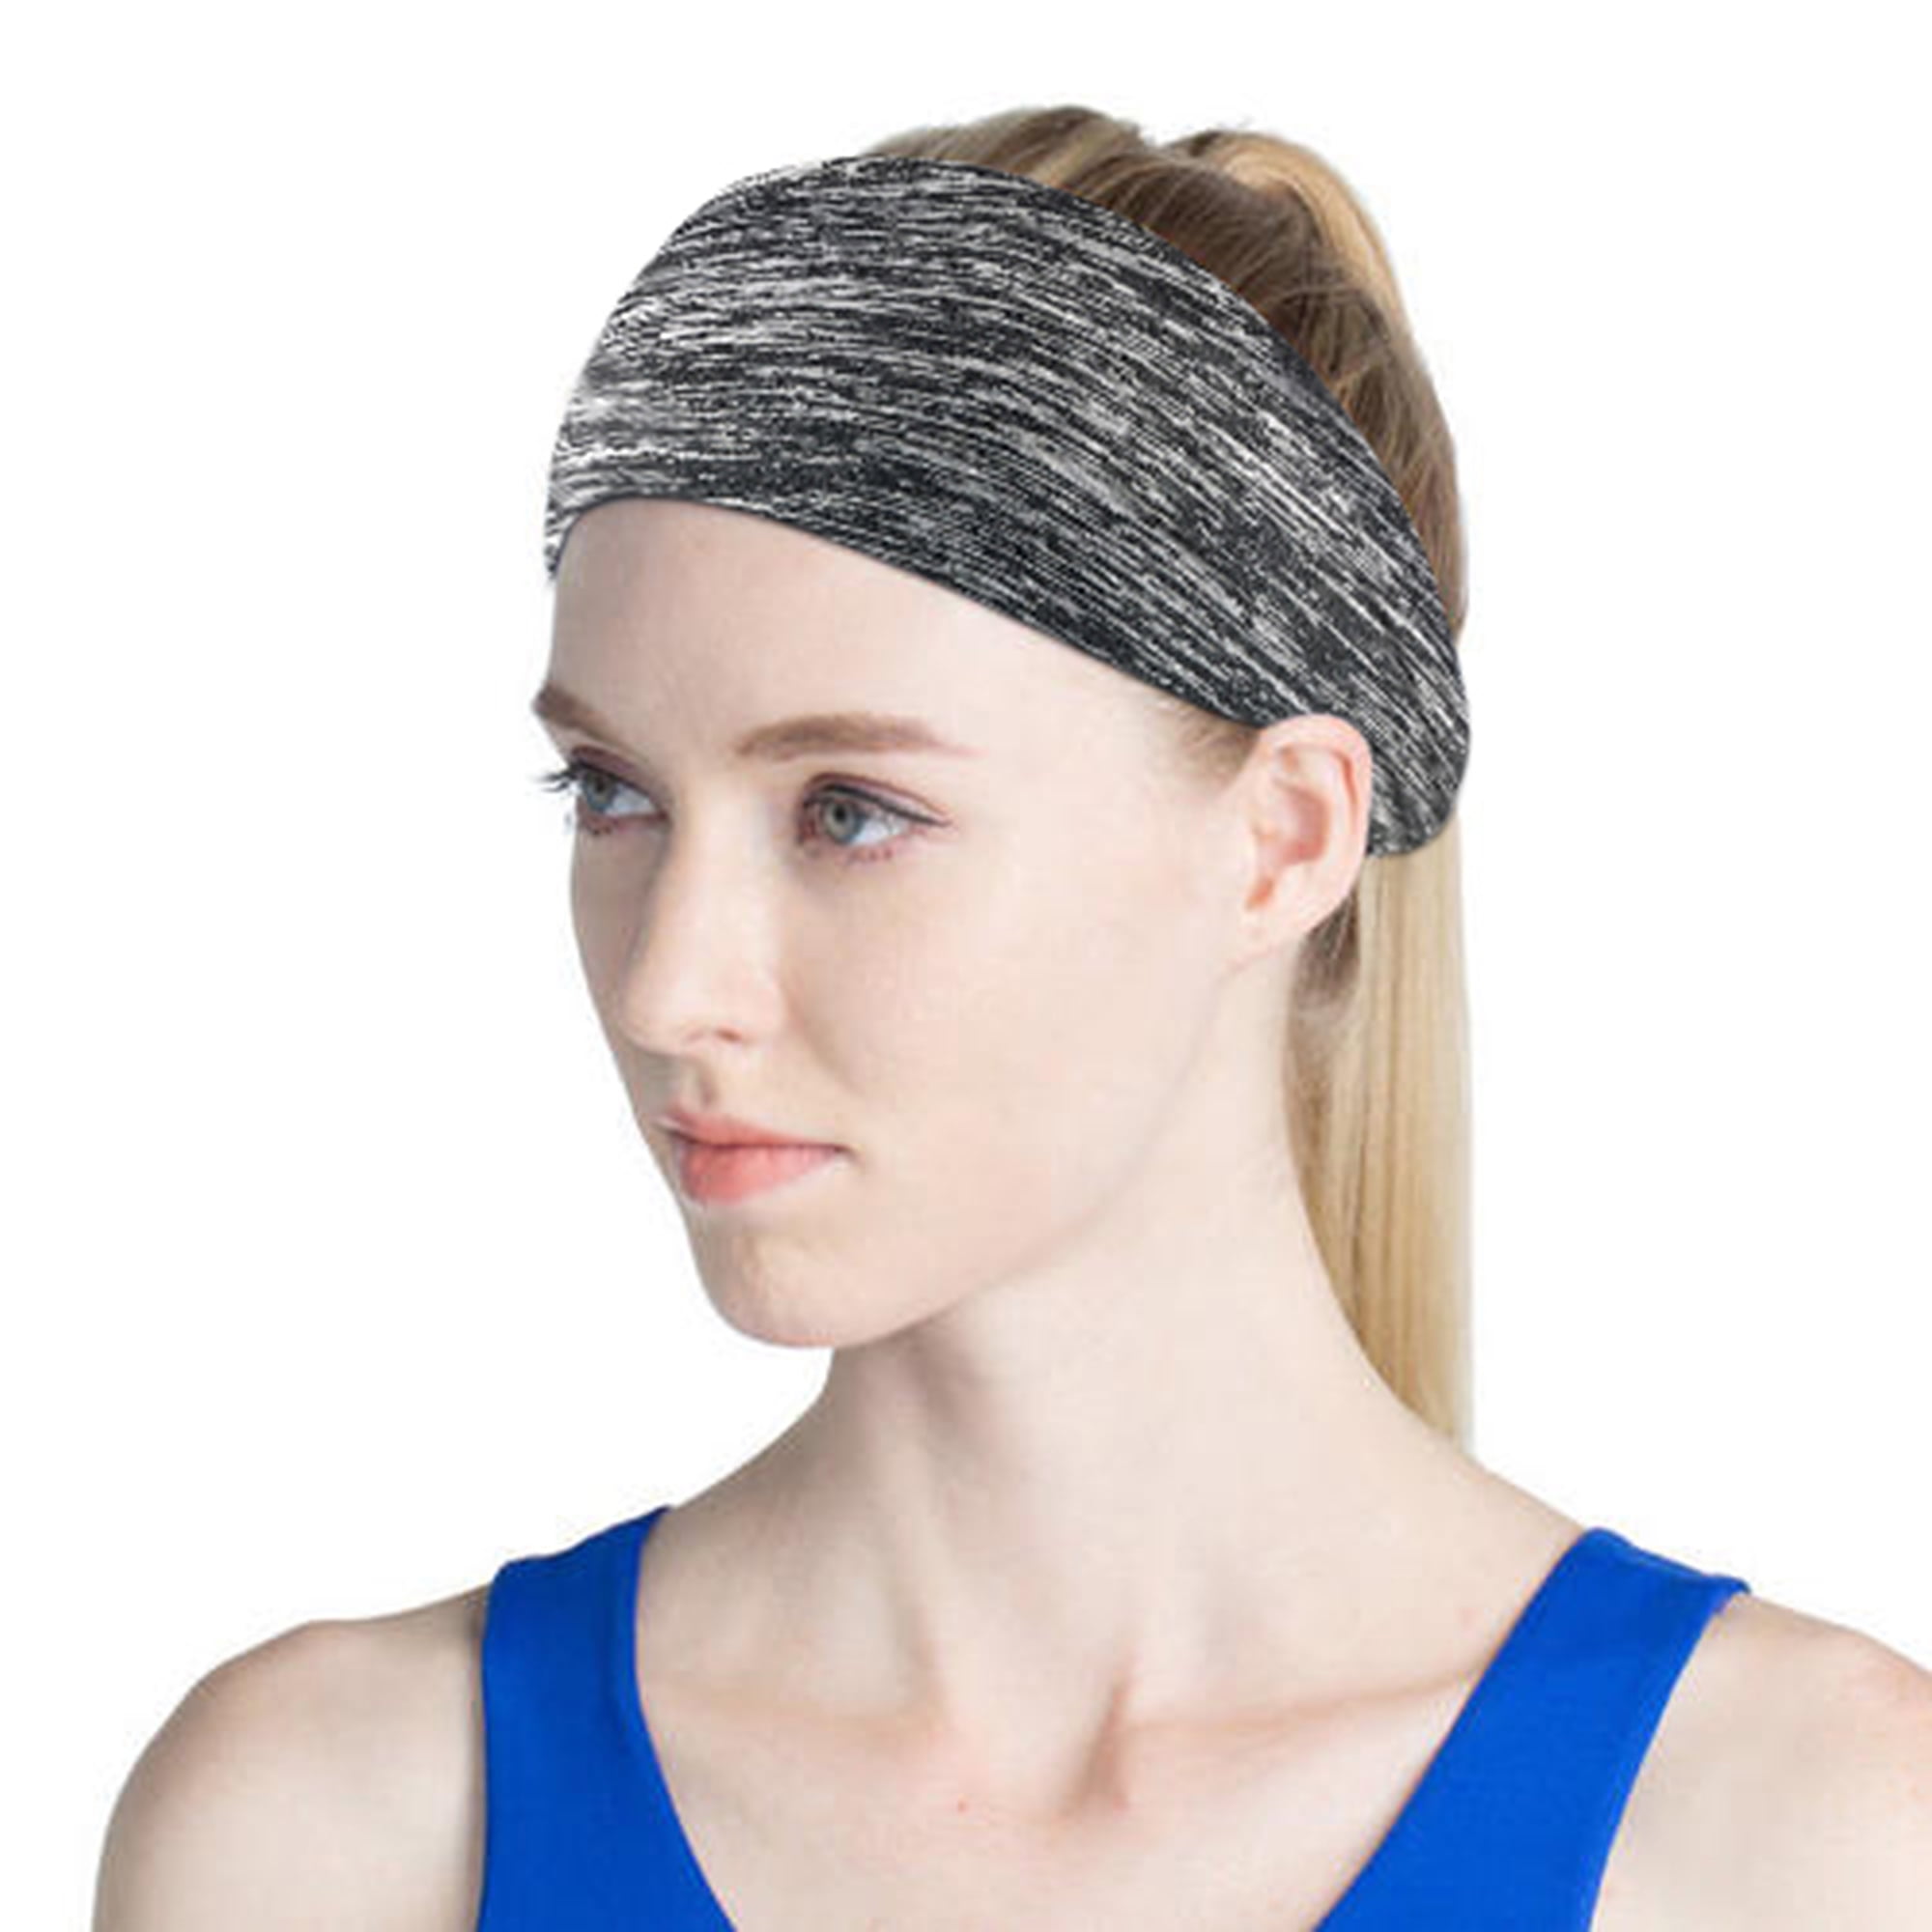 Details about   Sport Headbands Exercise Bands Sweat Bands Hair Bands Elastic Stretch Head Wraps